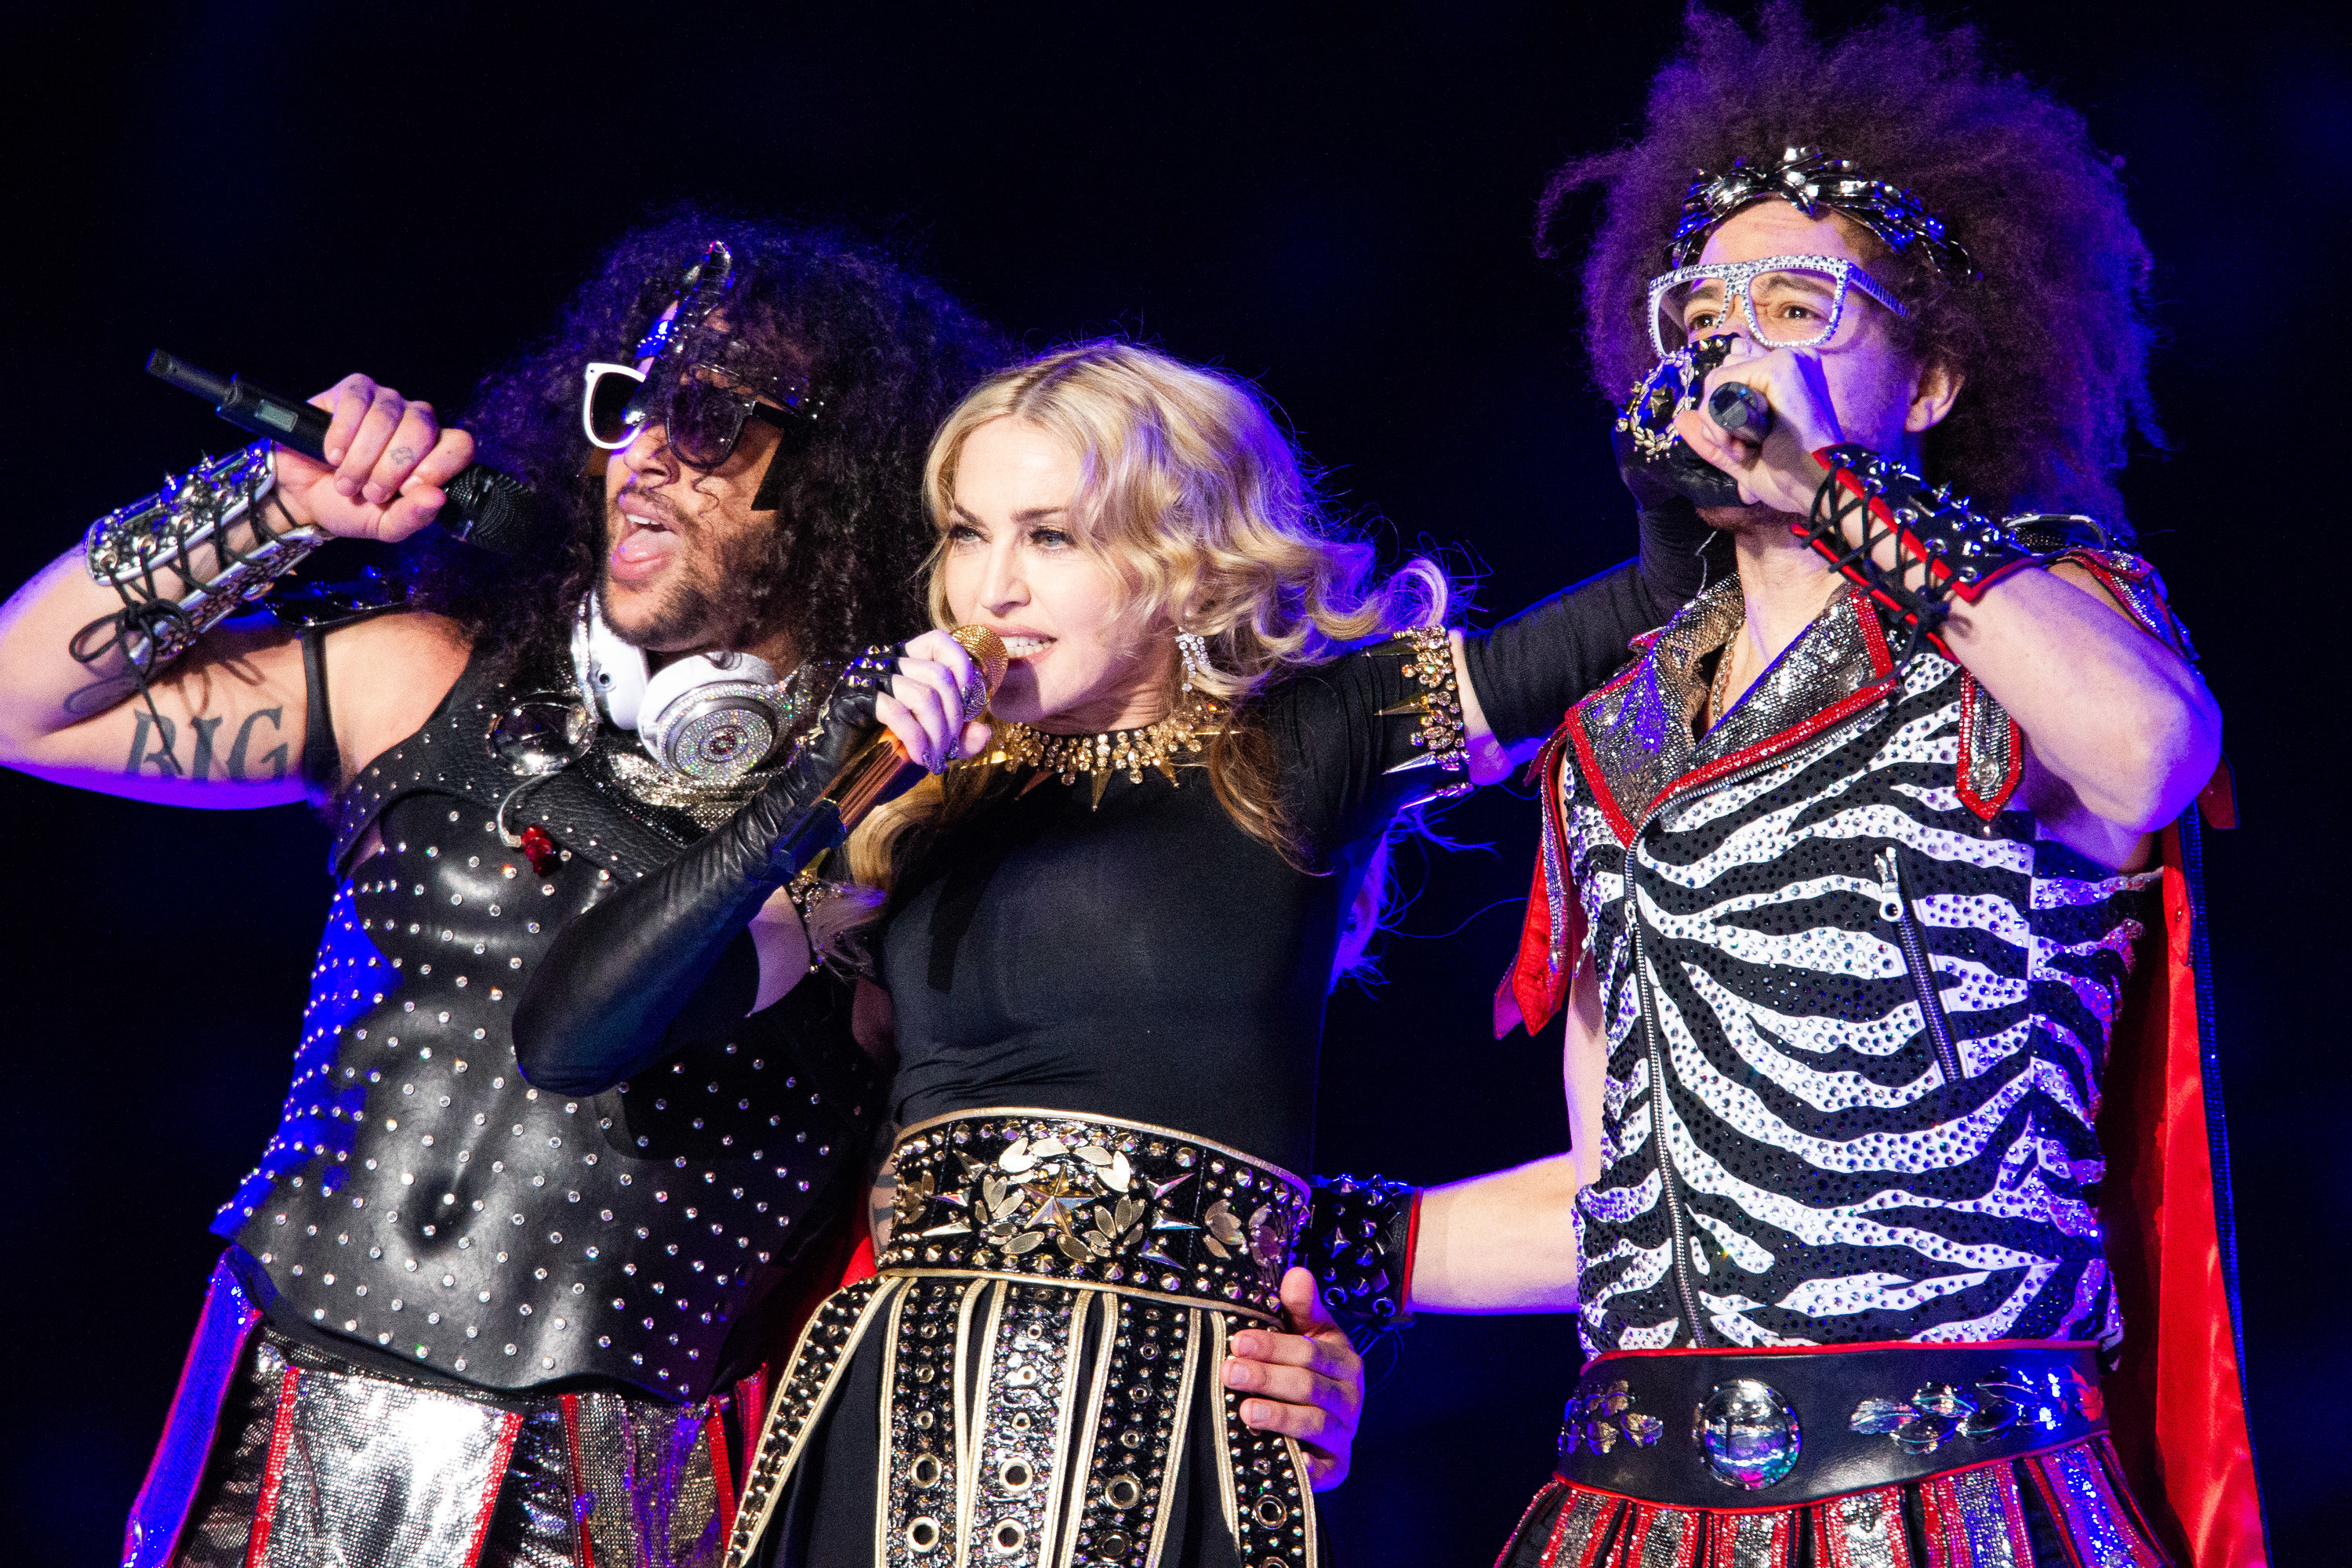 Madonna performs with LMFAO members SkyBLU and Redfoo during the half time show at Super Bowl XLVI